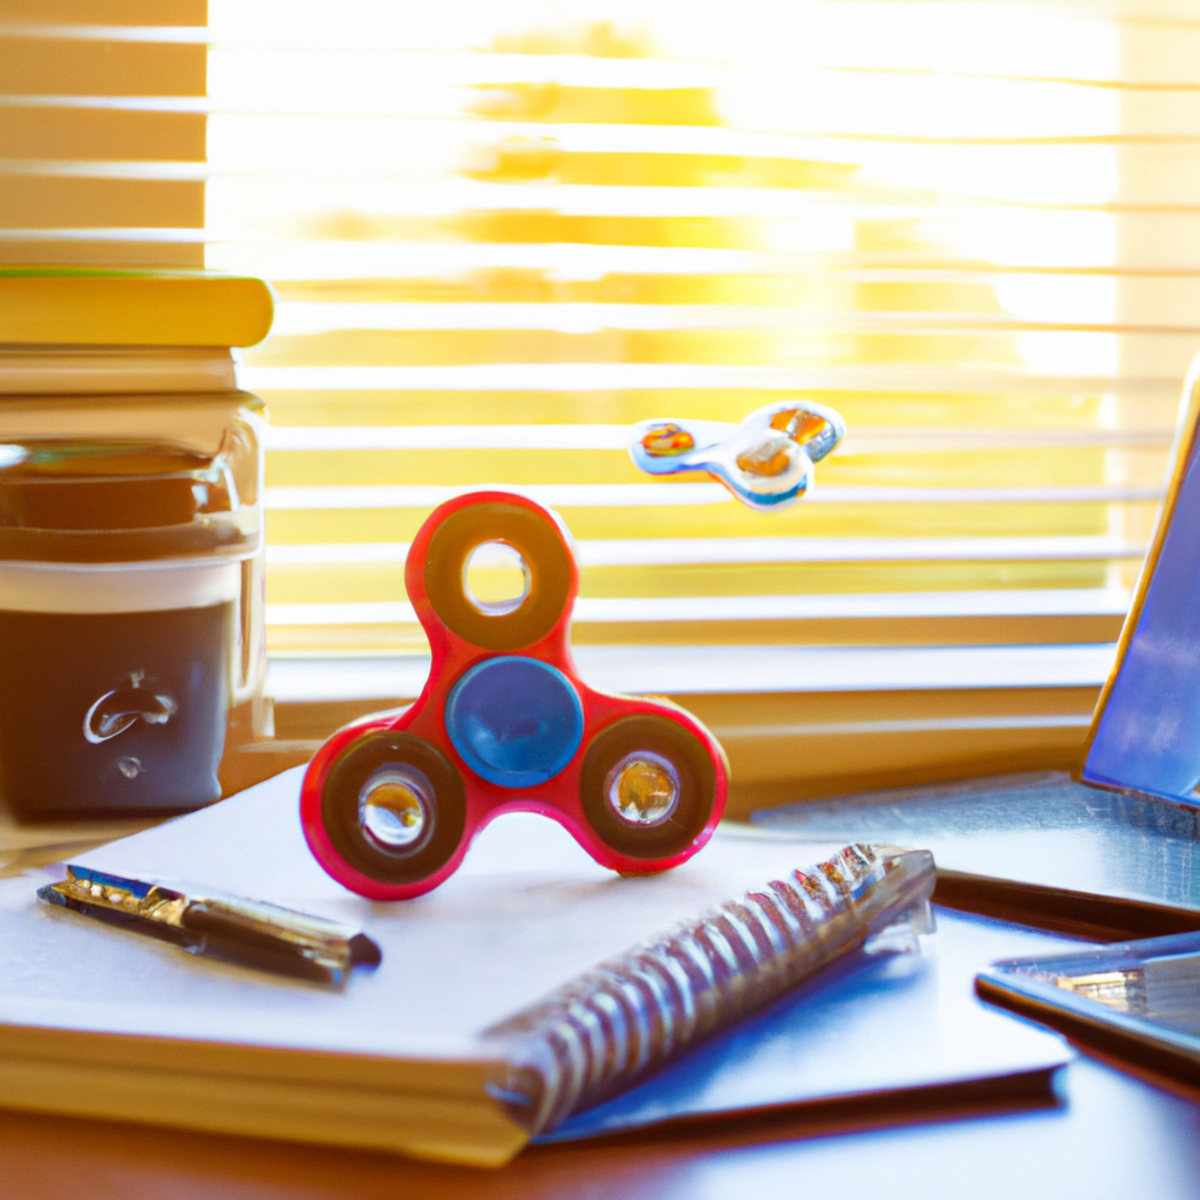 Effective stress management strategies - A cluttered desk with textbooks, notes, laptop, coffee, stress ball, and fidget spinner, representing a student's exam season stress.